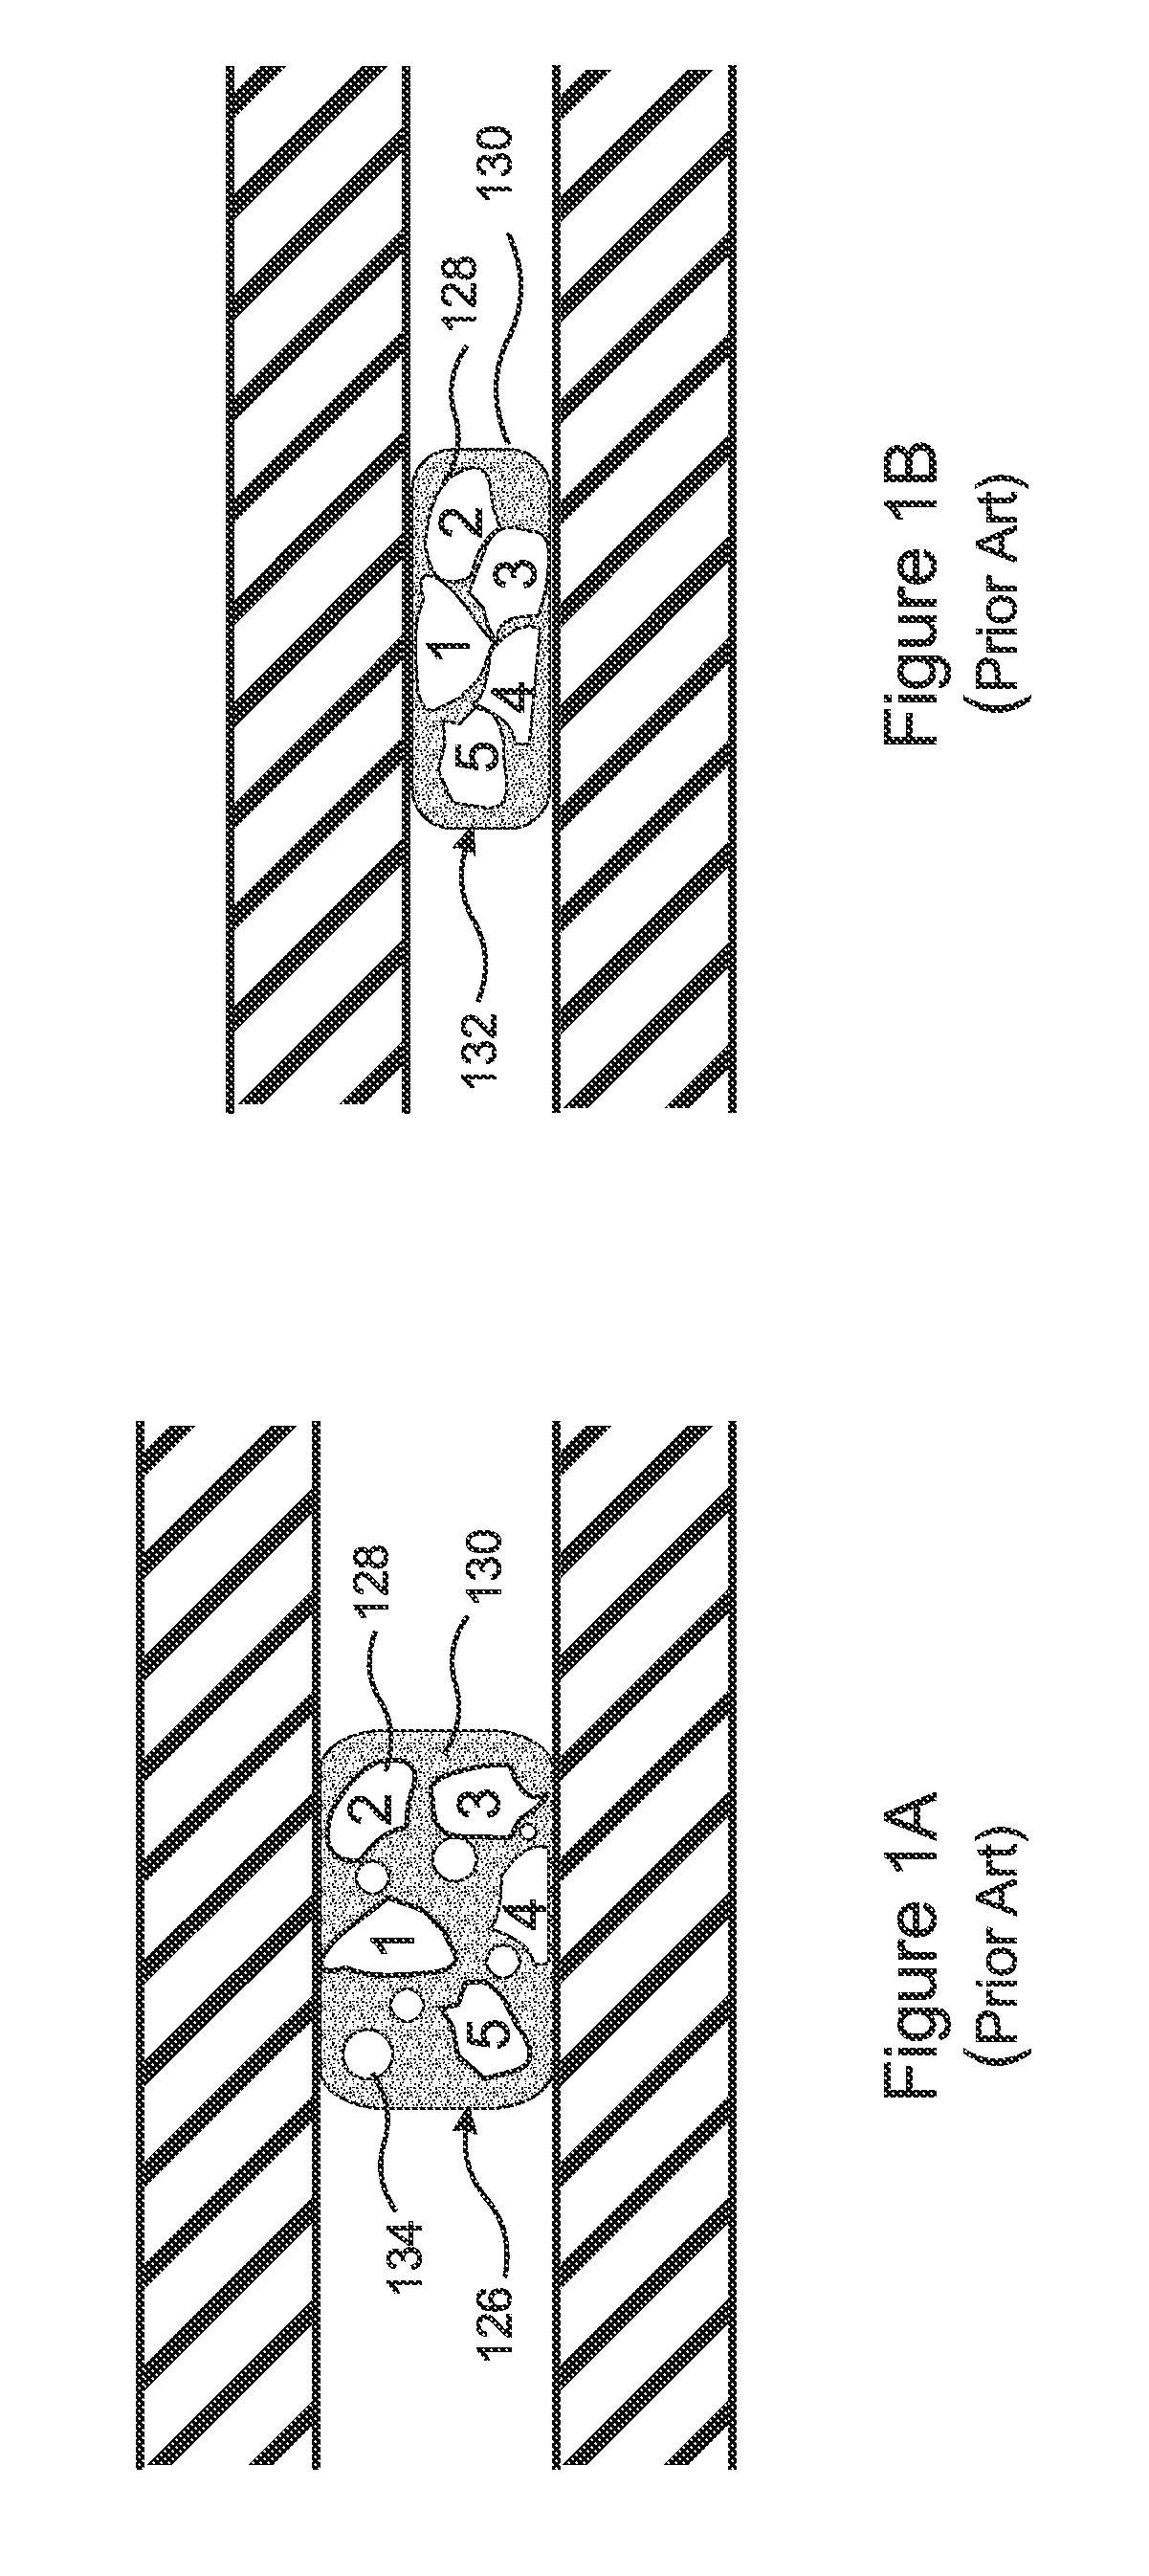 Production plant for forming engineered composite stone slabs